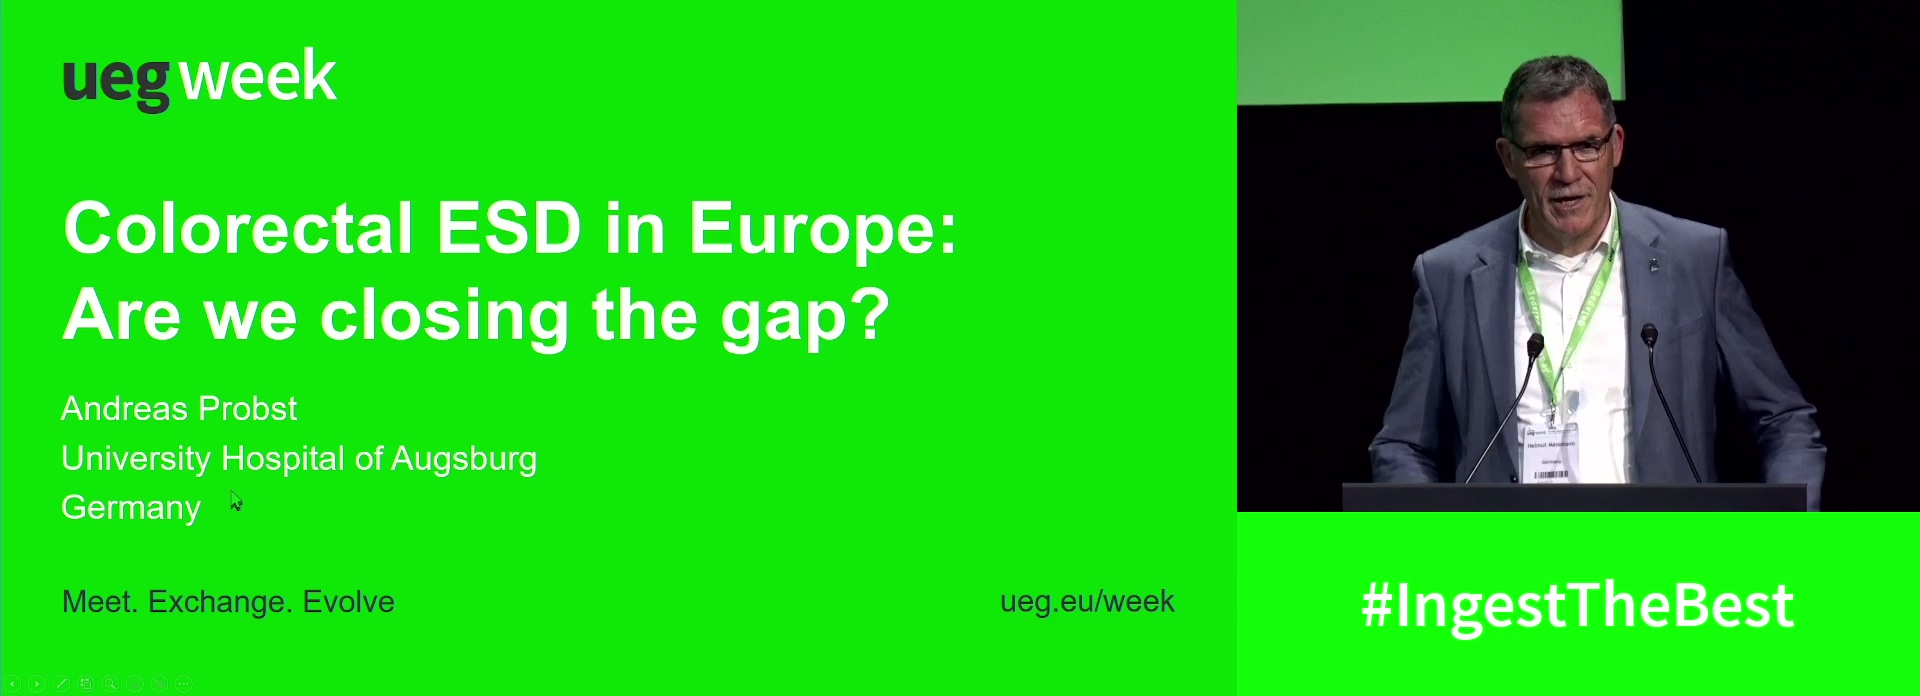 Colorectal ESD in Europe: Are we closing the gap?